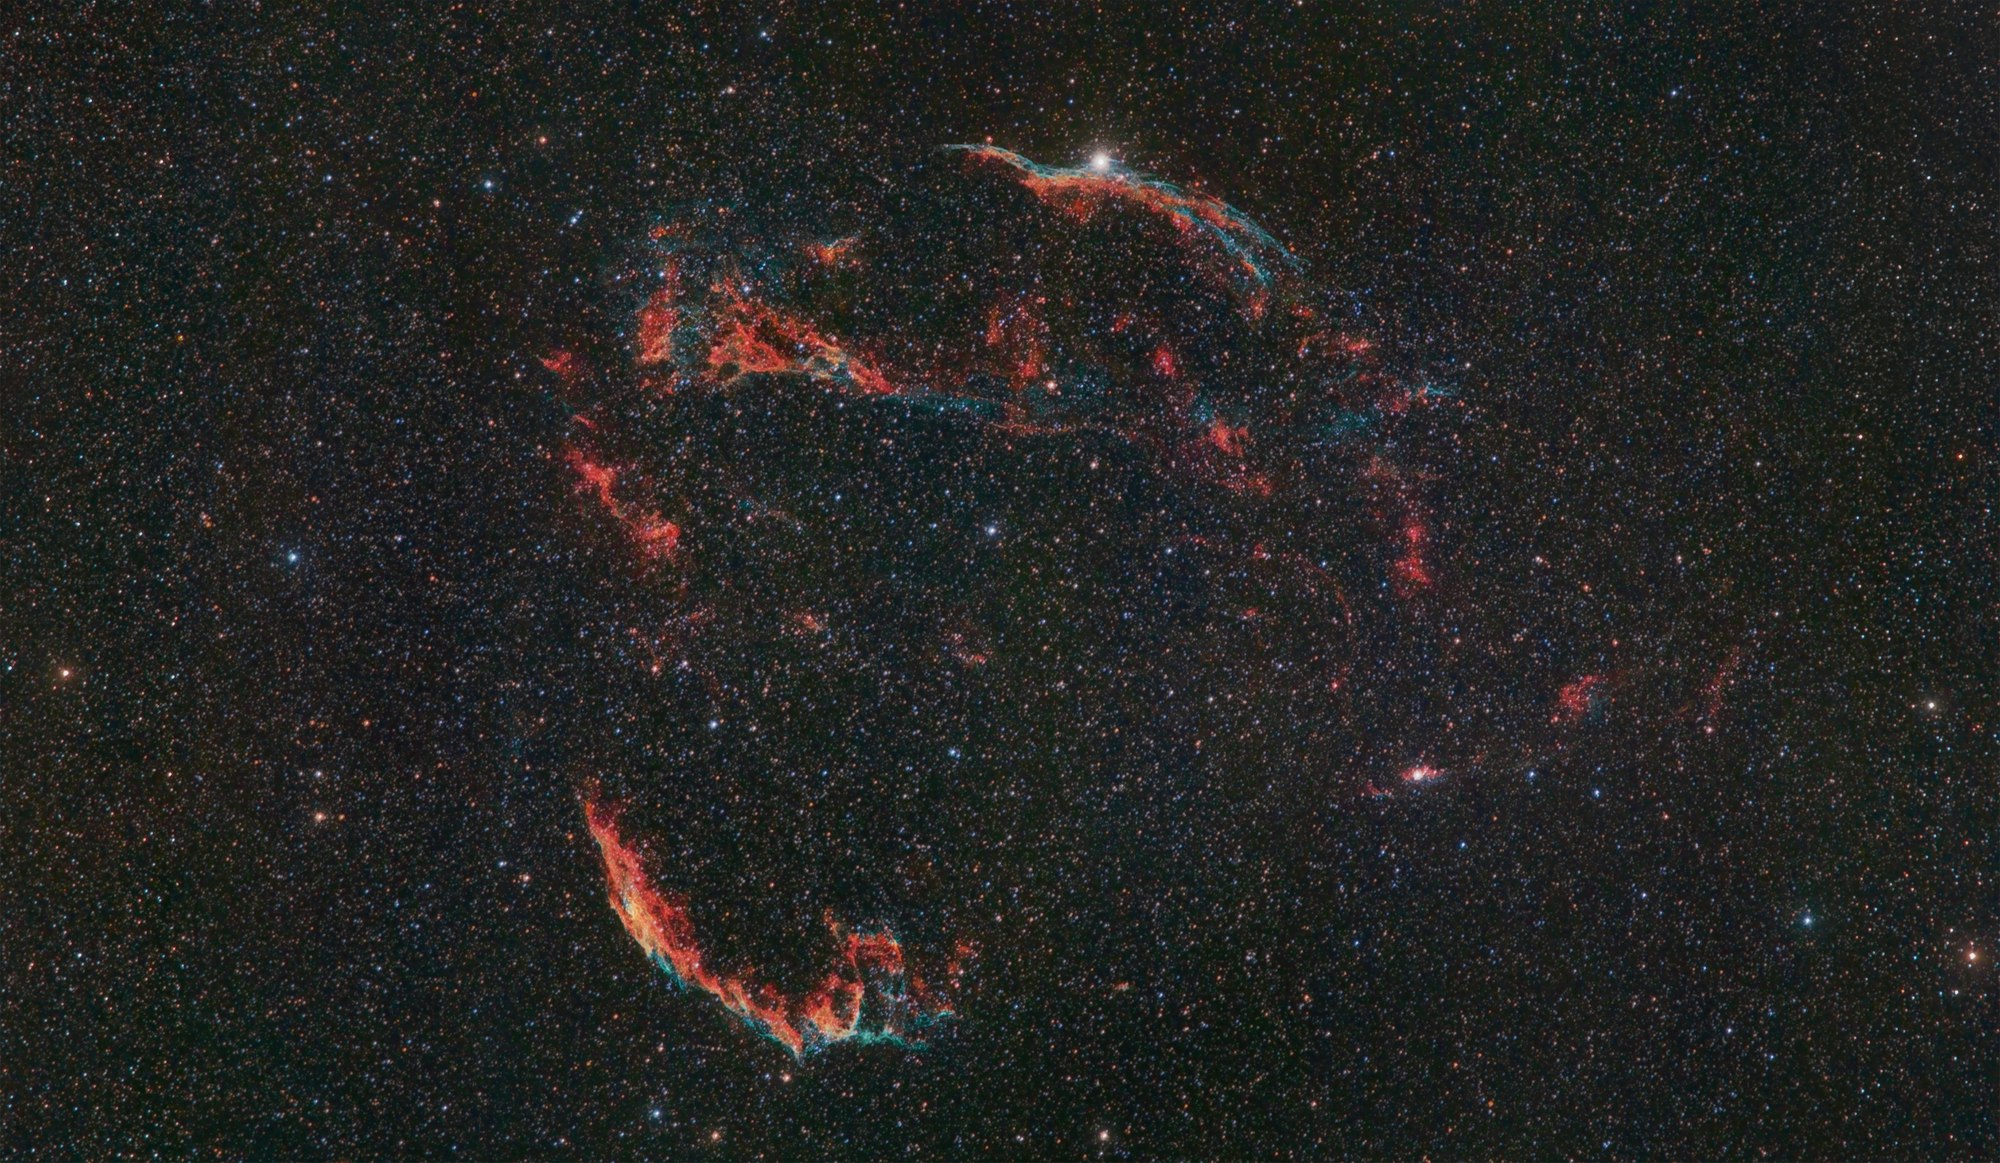 The Veil nebula, remnant of a dying star and still an astronomical mystery. This emission nebula of ionized gas is very large in size, both visually in our sky and physically in space. 6 full Moons wide and 90 light years in size, 5 to 10 thousand years old and 1500 lights years away. There is no neutron star at the center of this nebula, there is one neutron star at the base of the blowout region but of unknown distance. The intertwined rope-like filaments of oxygen, sulfur and hydrogen gas are all that remains visible of what was once  a star in our Milky way galaxy.